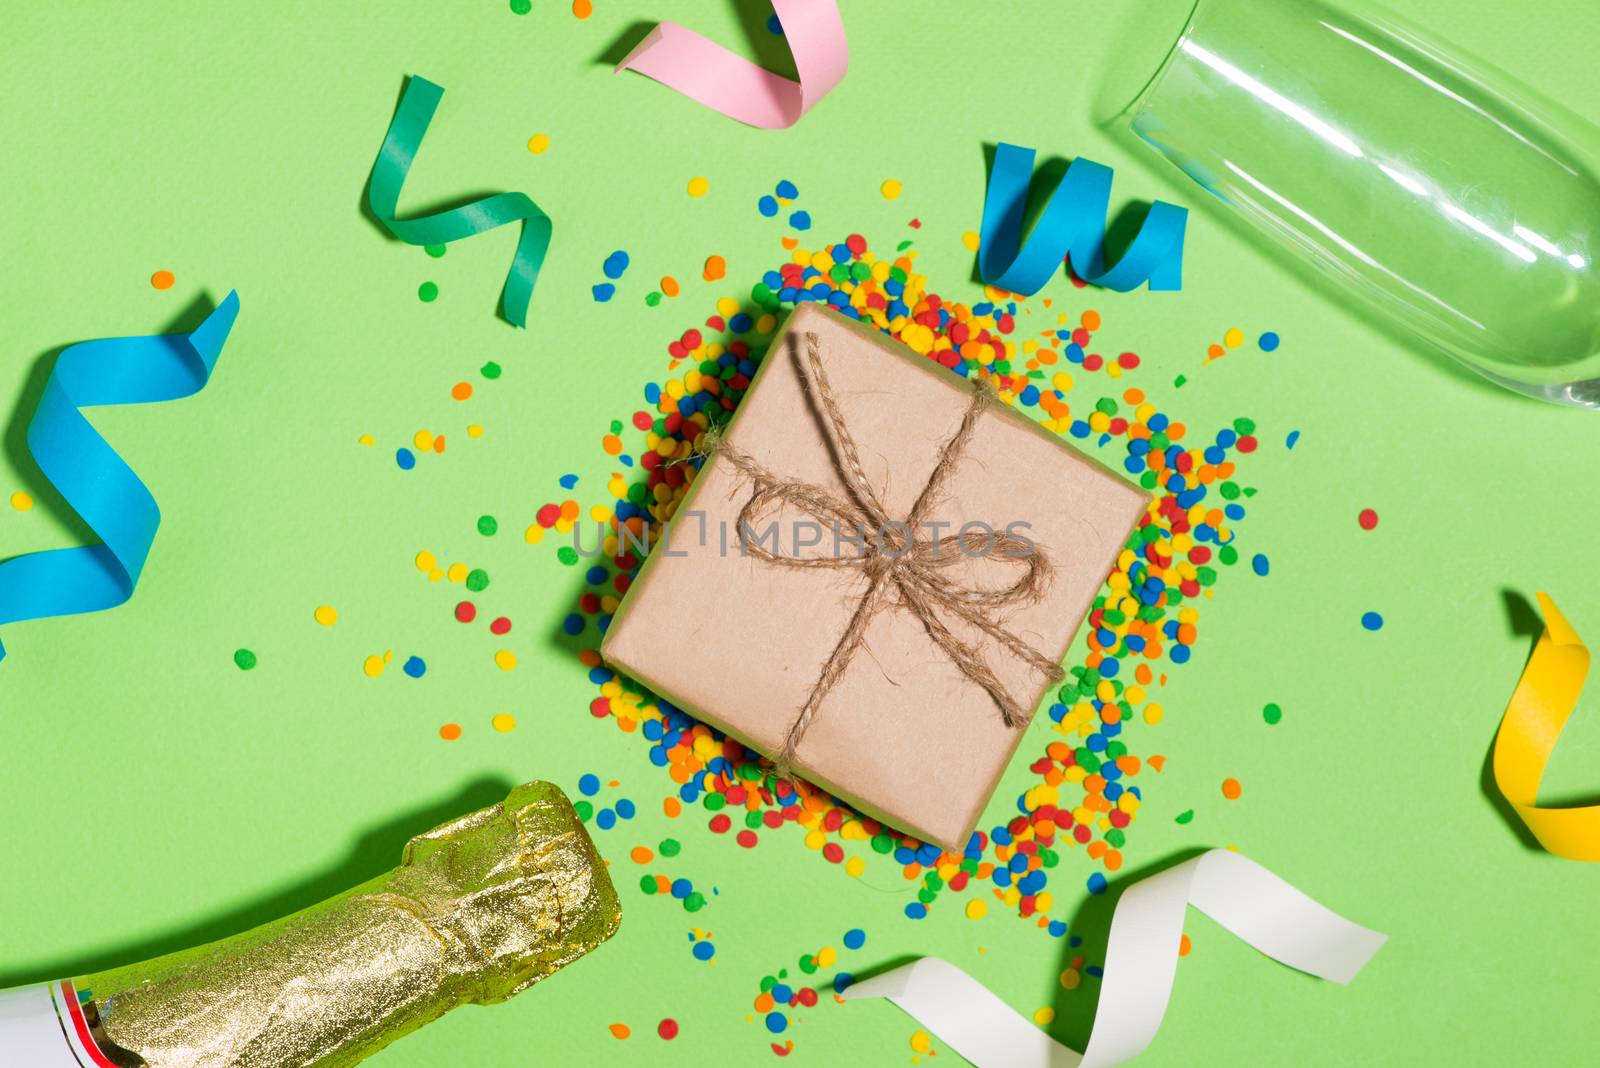 Celebration Flat lay. Gift box with colorful party items on green background.